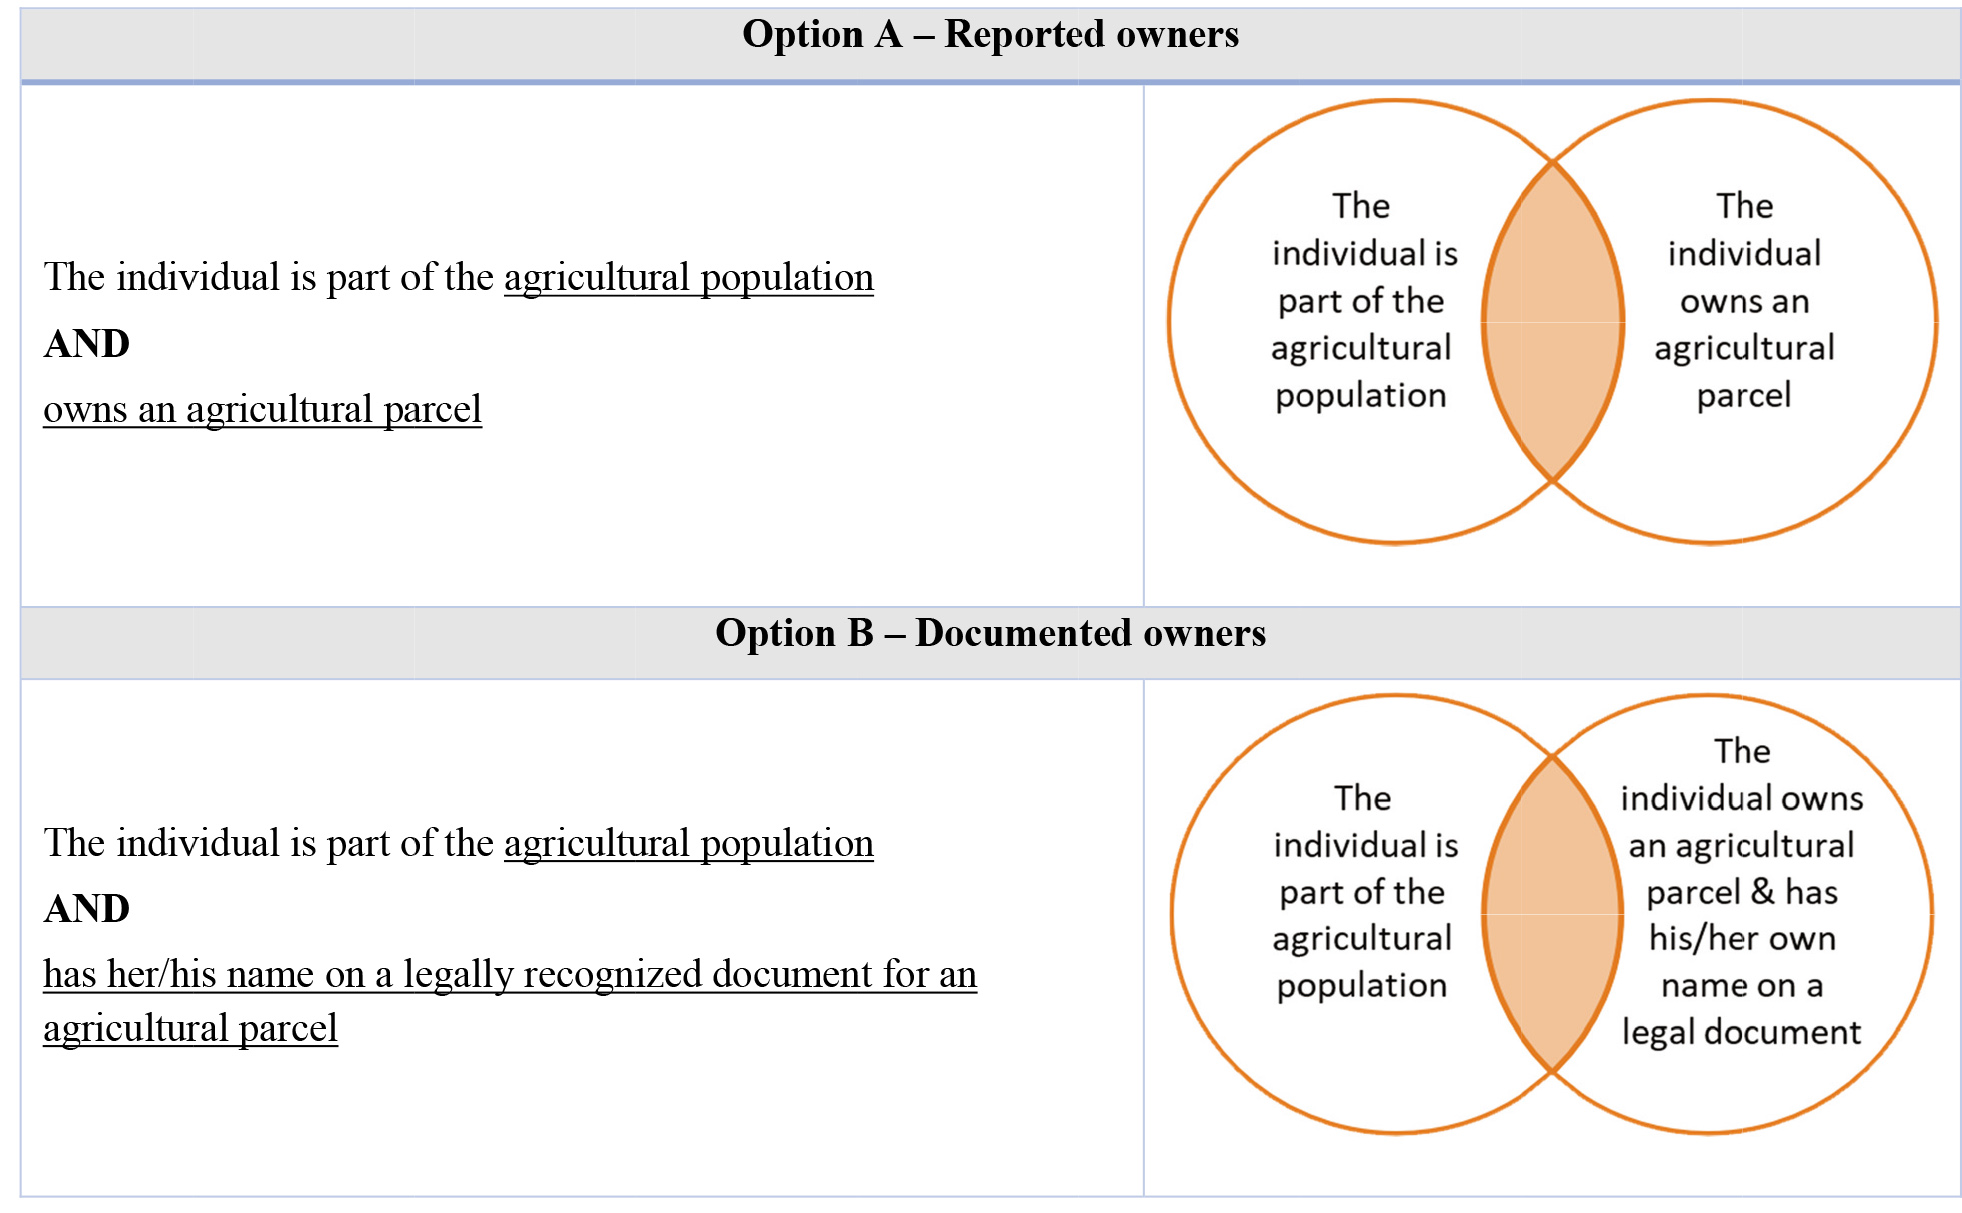 Two definitions of agricultural landowners in EHCVM surveys.